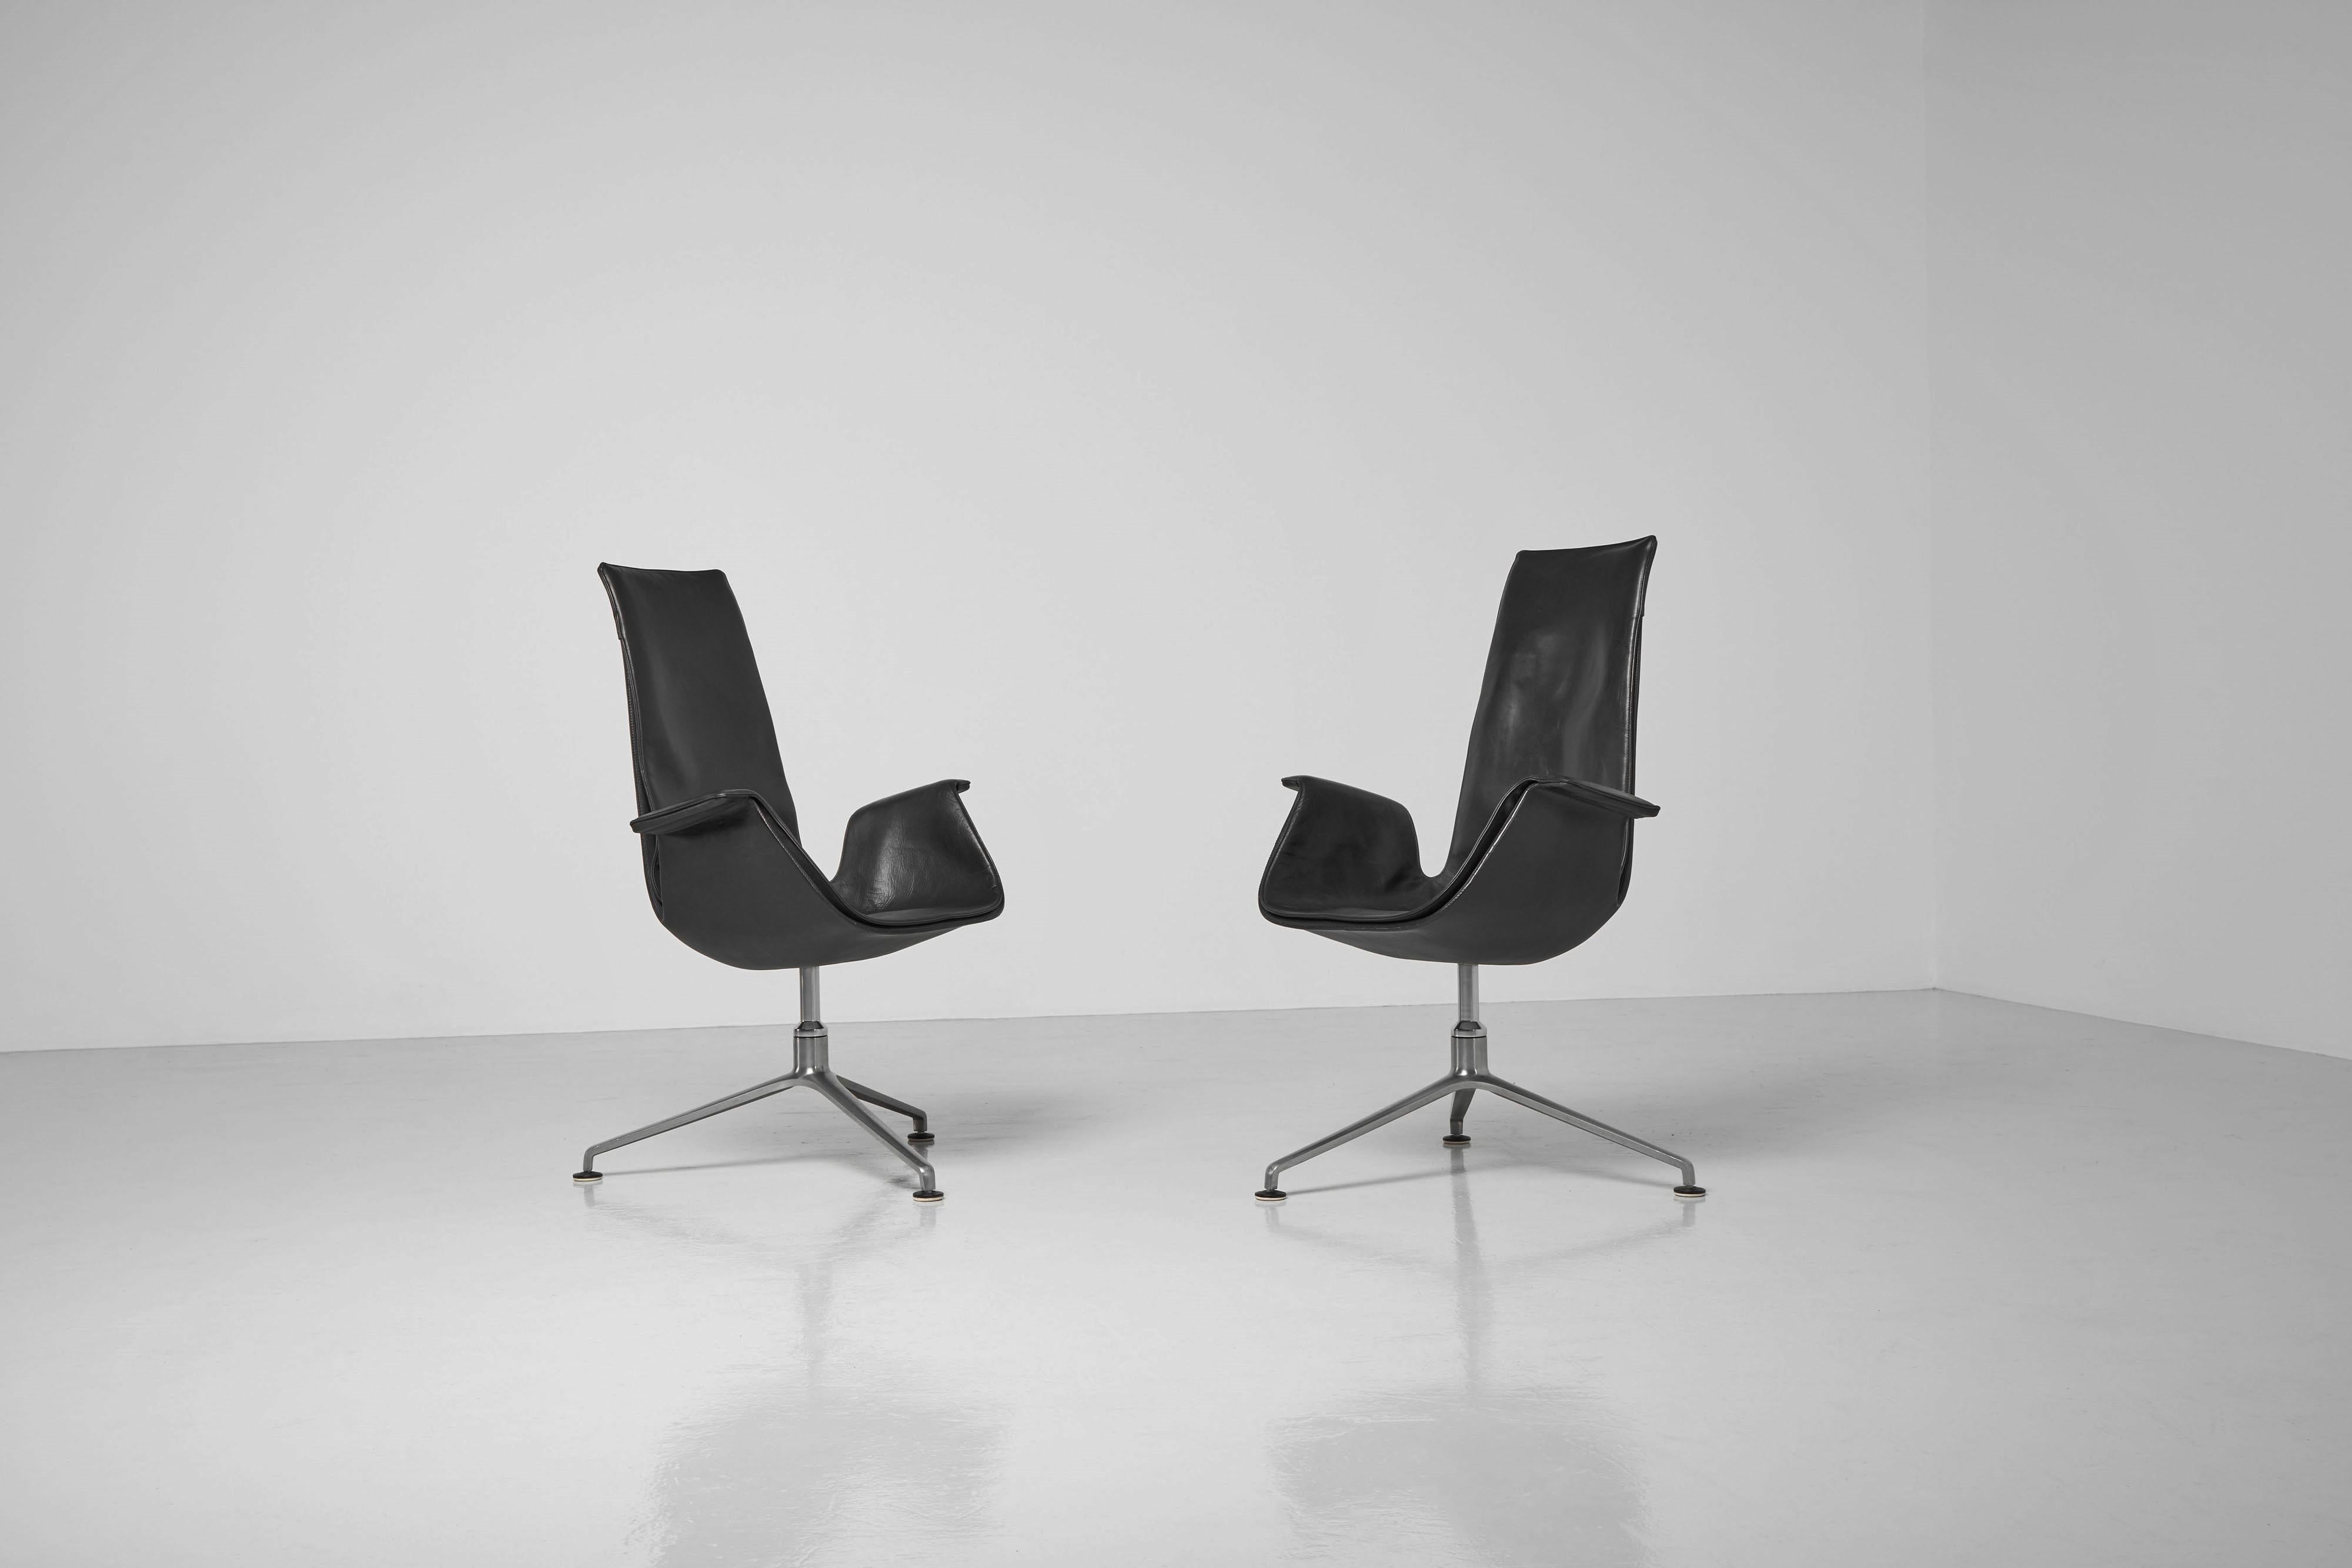 Super large set of high back conference office chairs model FK6725 designed by Preben Fabricius and Jorgen Kastholm and manufactured by Kill International, Germany 1964. These so-called bird chairs have their original black leather seats, so they